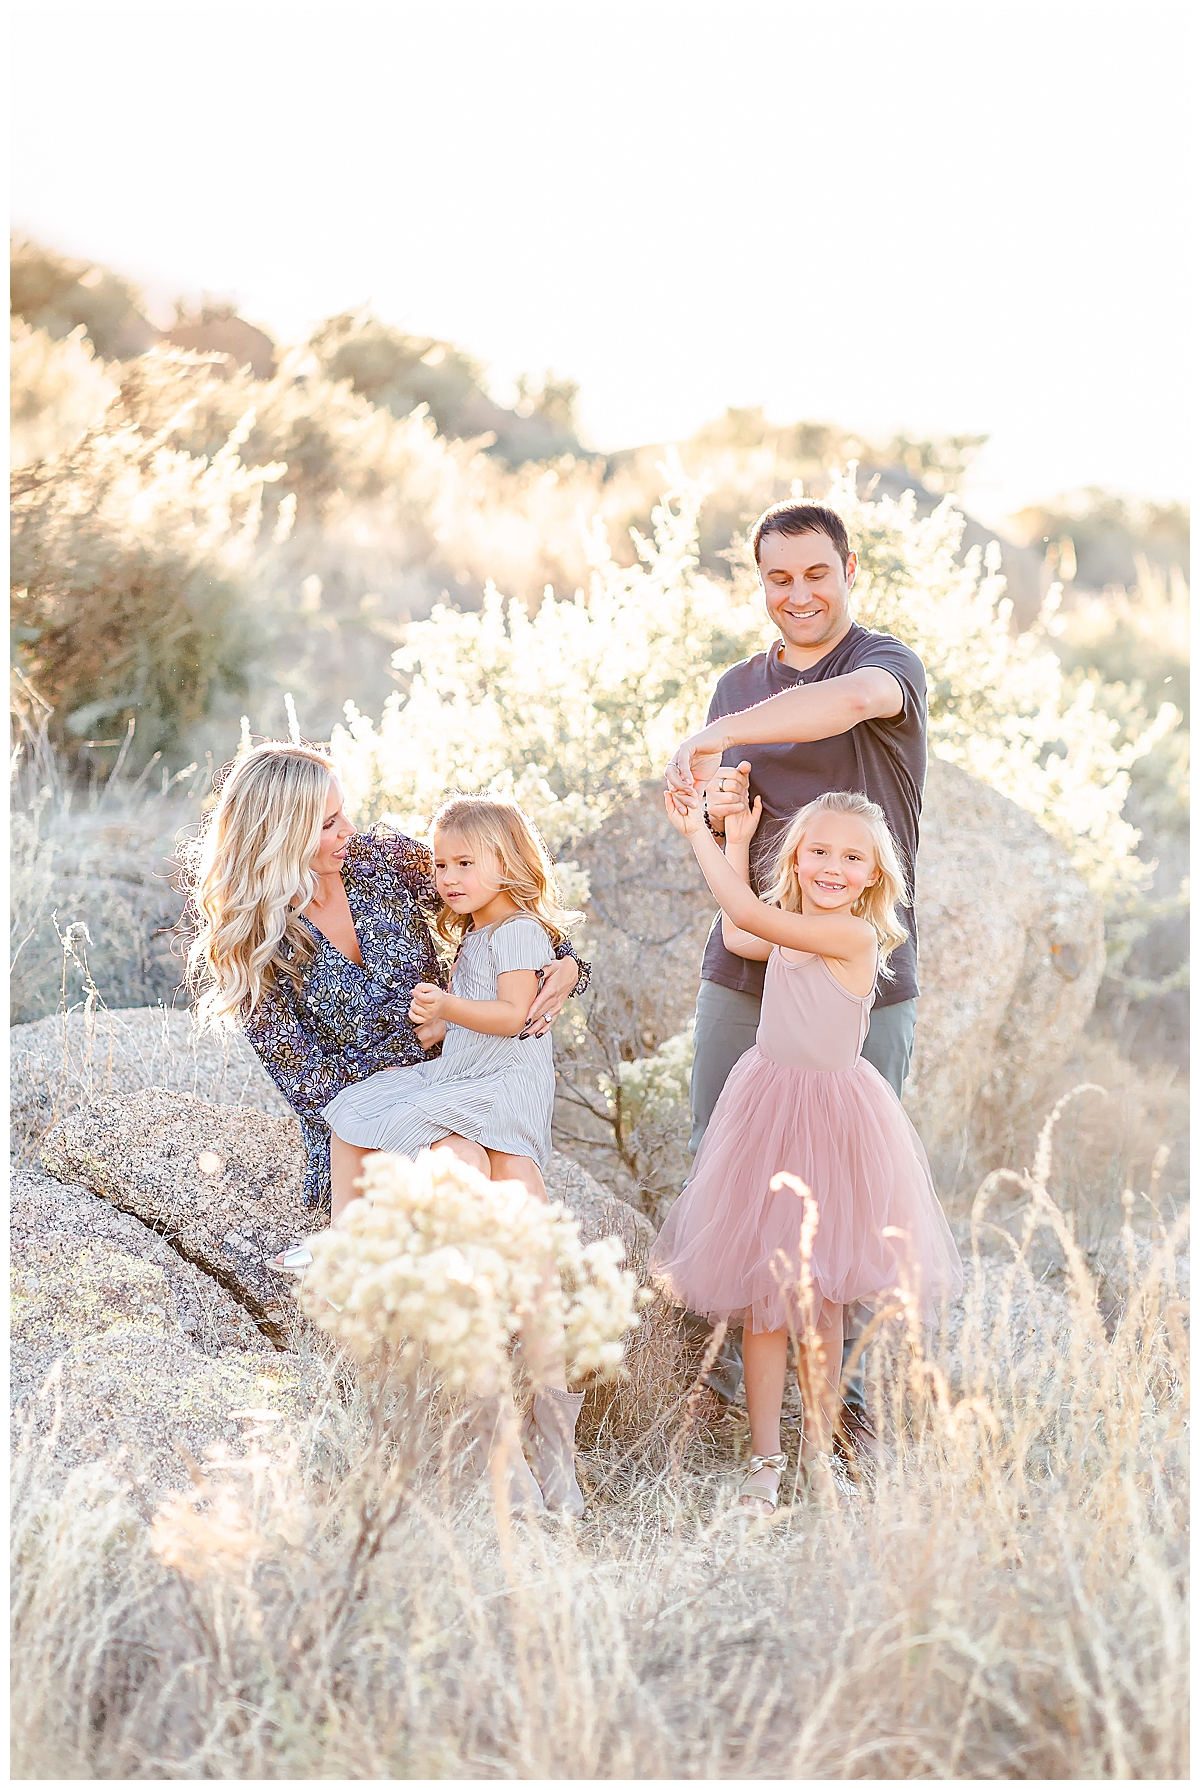 Family dancing in the desert in Scottsdale, AZ photographed by Christine Deaton Creative